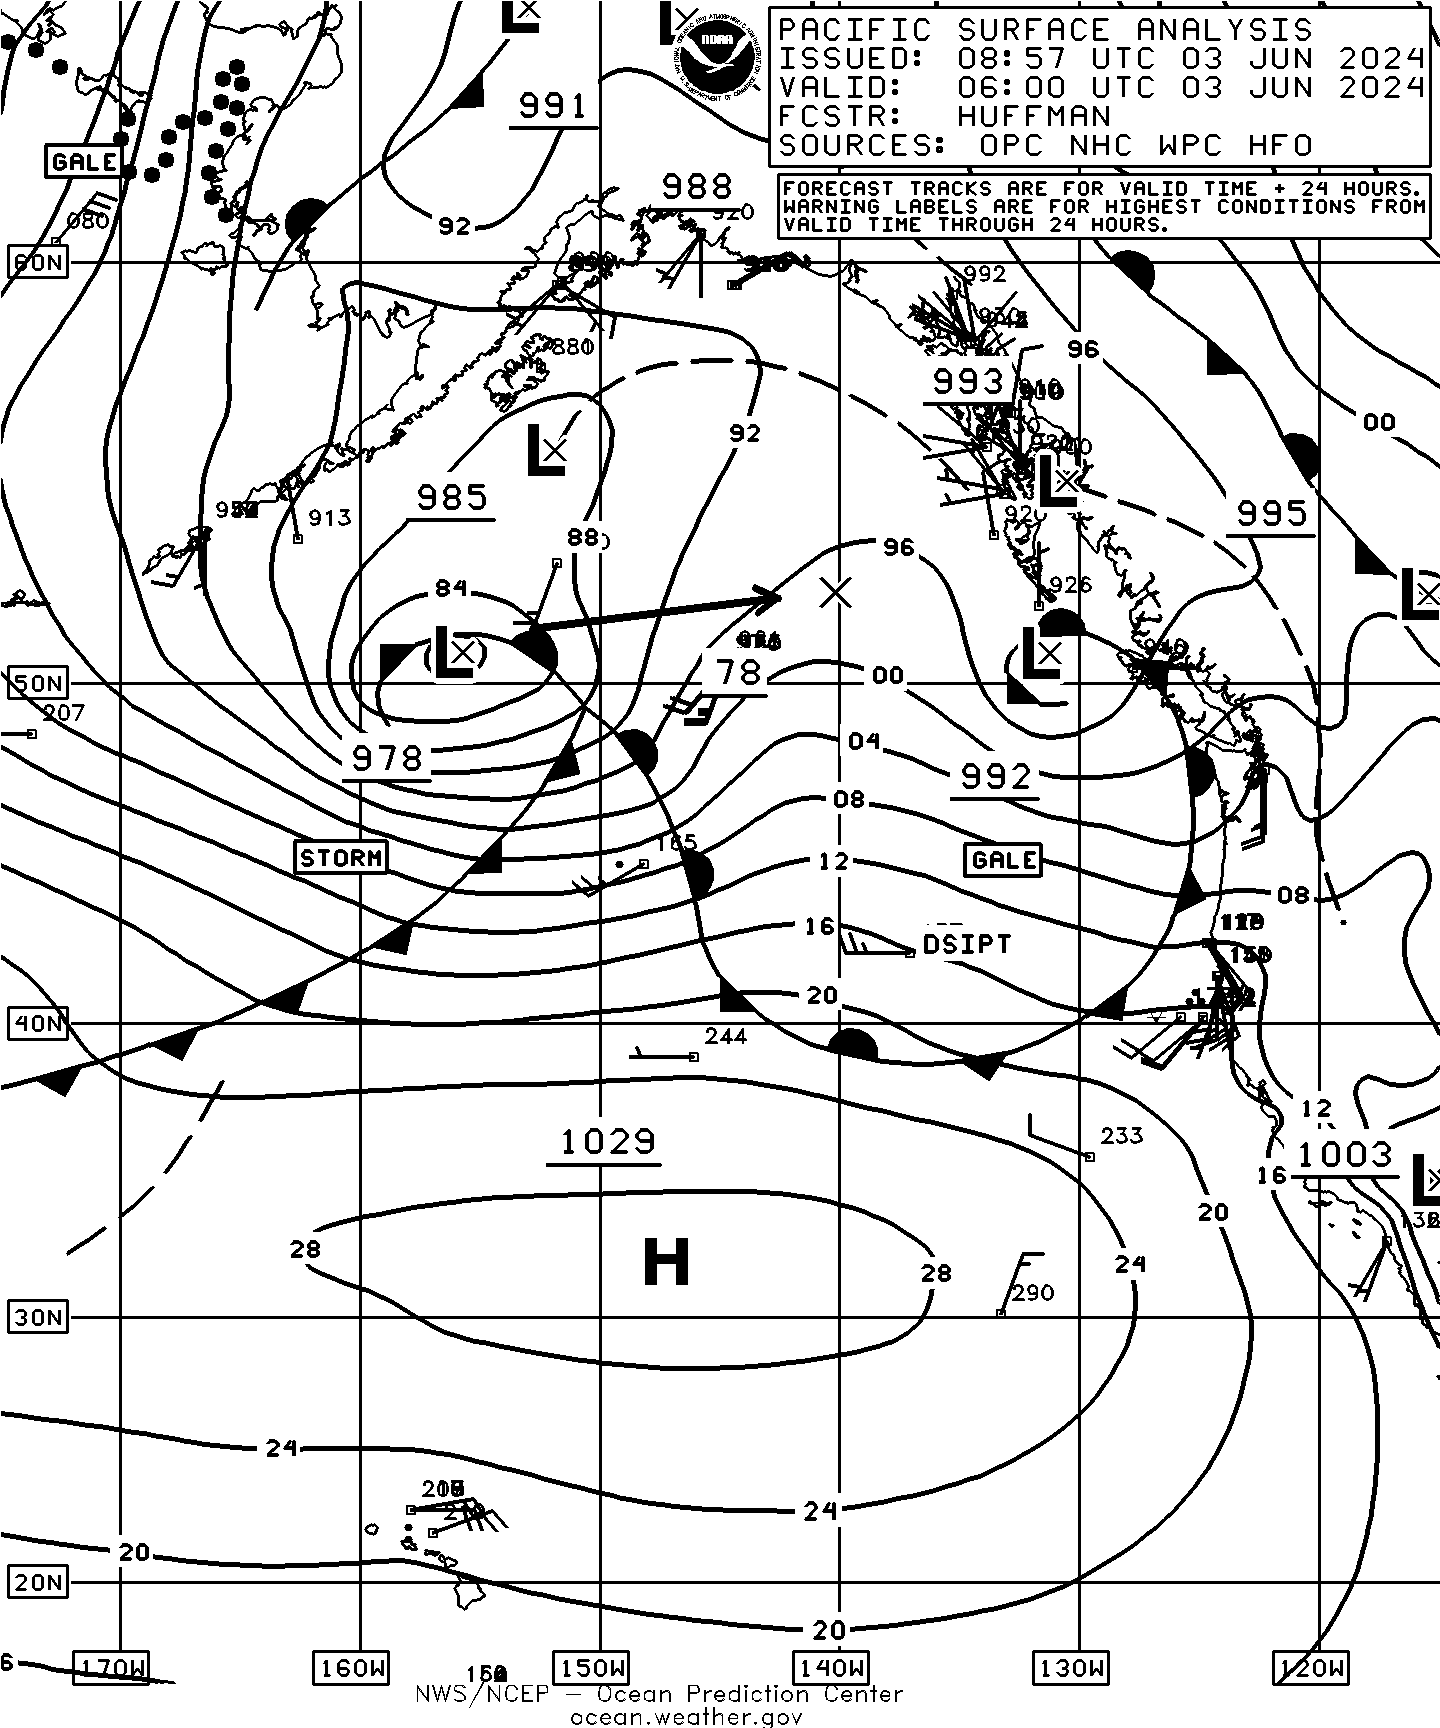 Image of Pacific Surface Analysis